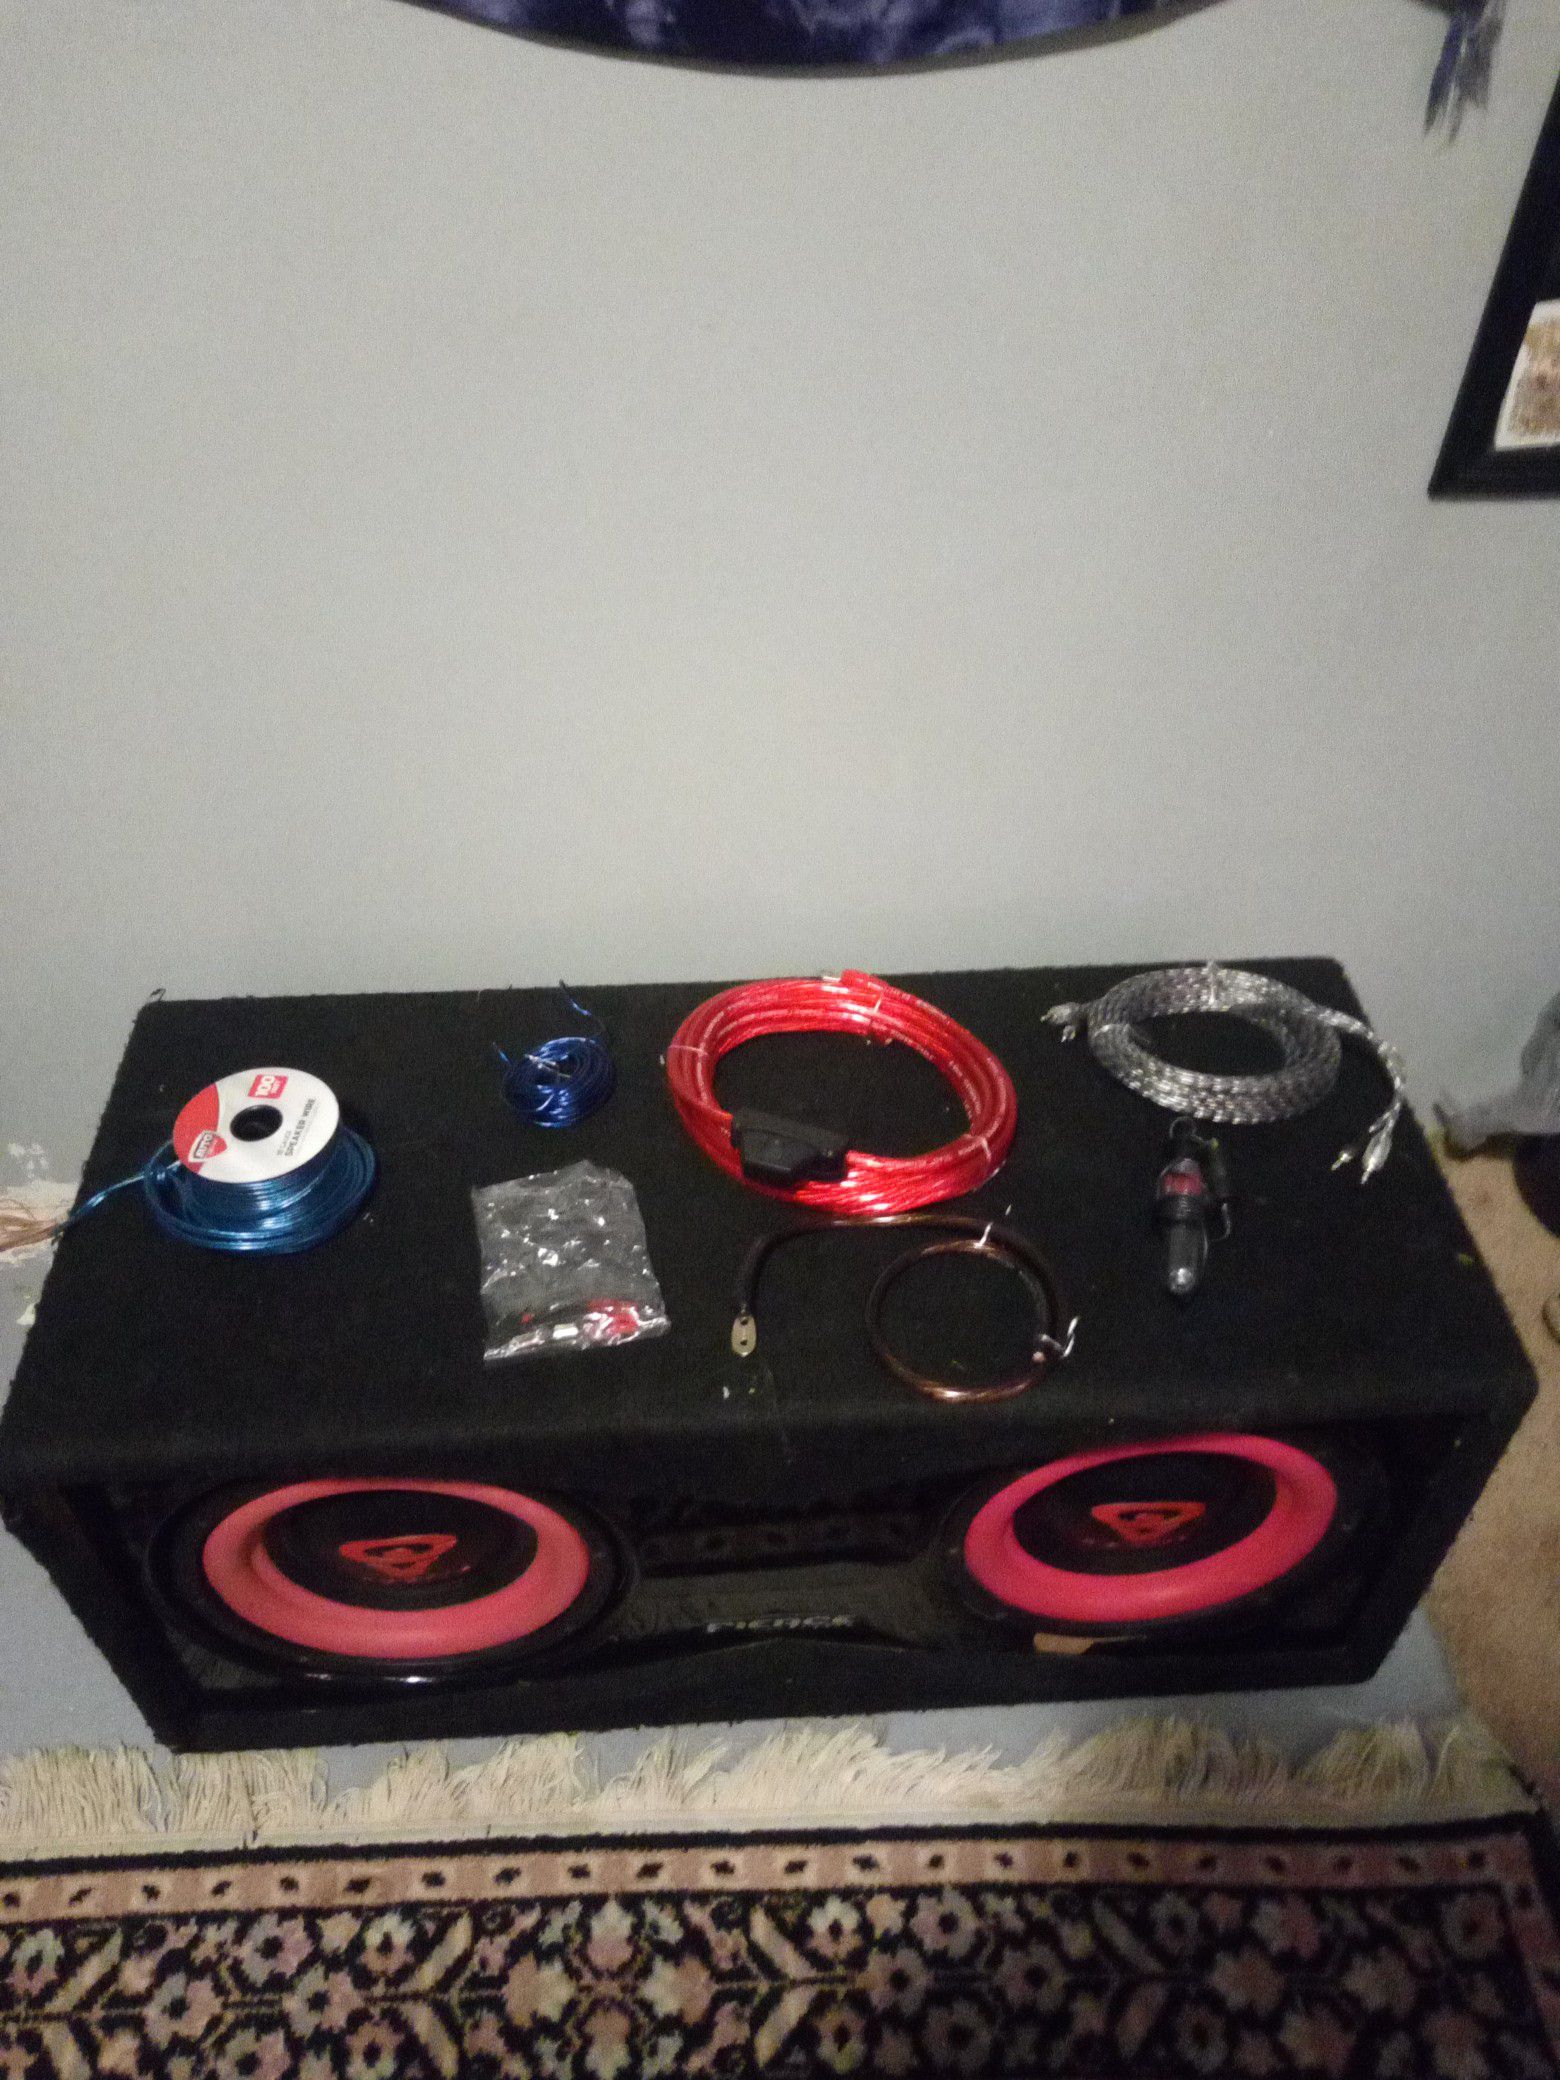 Cerwin Vega 10.2 subs with kicker + everything else in photo(s)